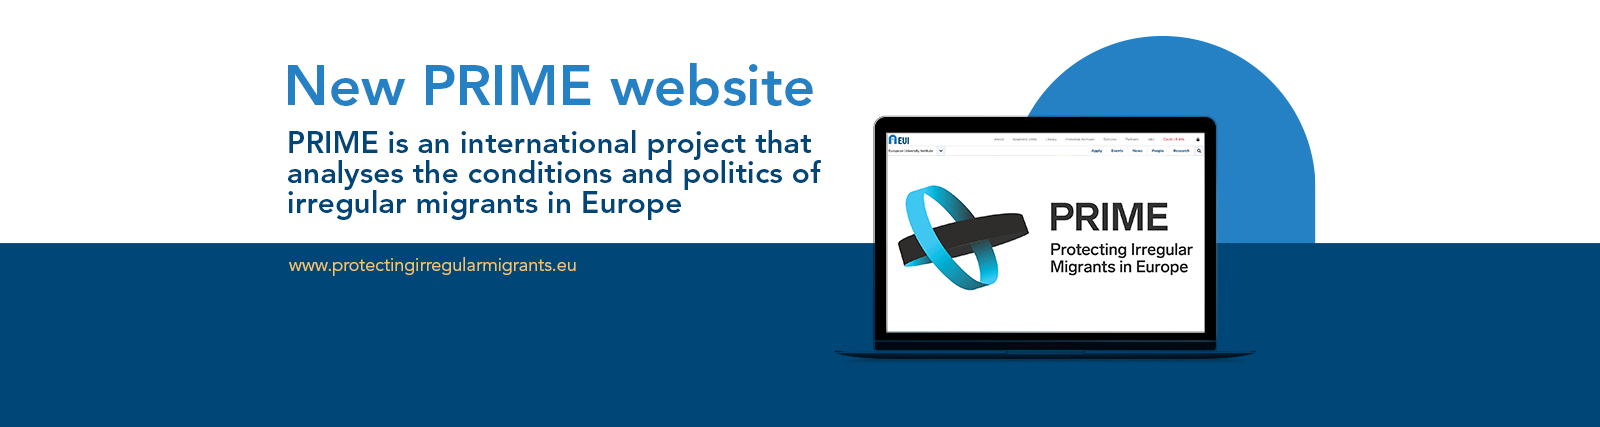 Permalink to:Our new Horizon Europe research project PRIME just released a new website!